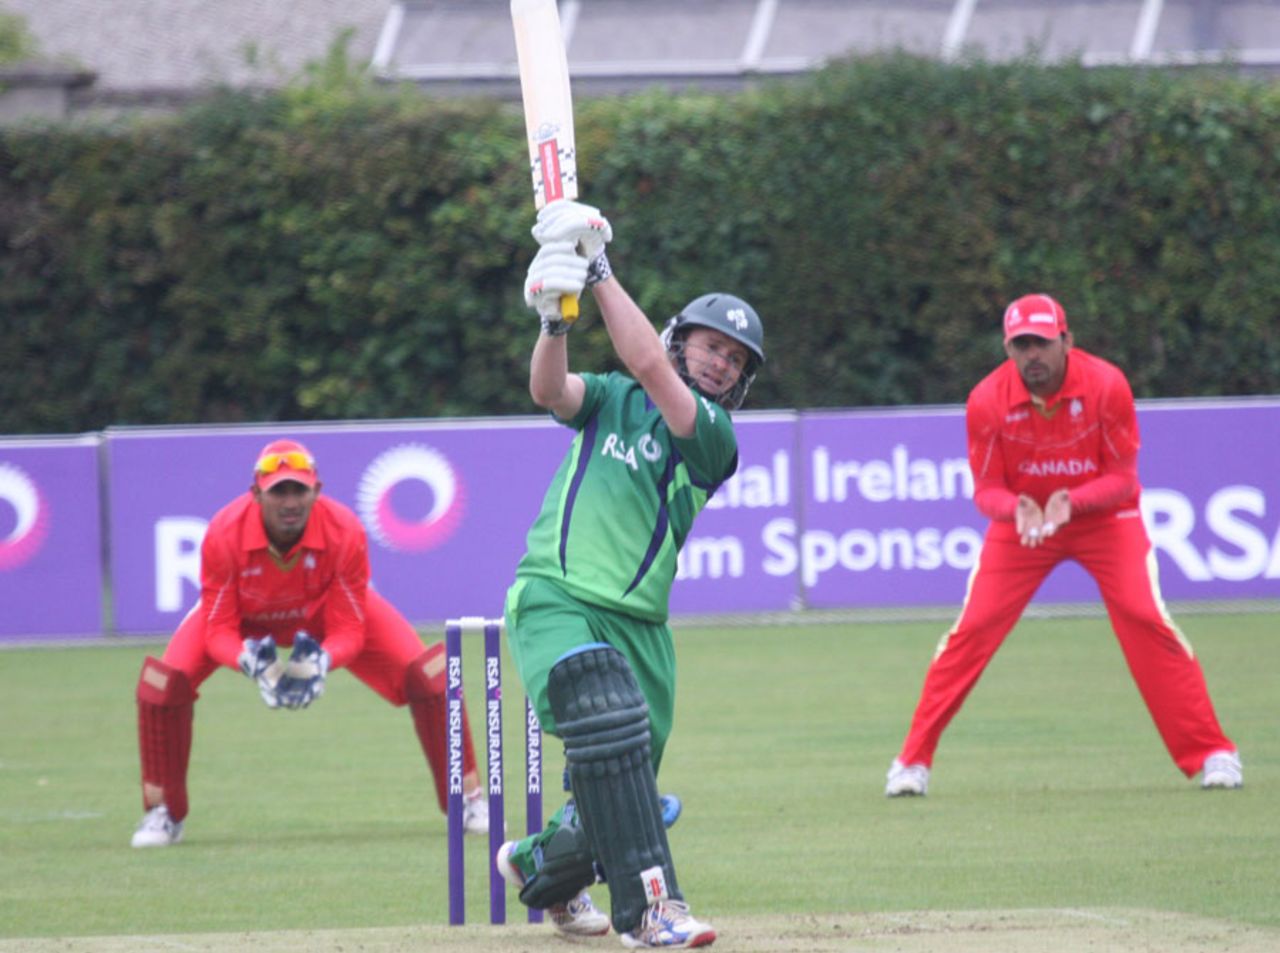 William Porterfield played his way to 67 off 75 balls, Ireland v Canada, Intercontinental Cup ODI, Dublin, September 19, 2011